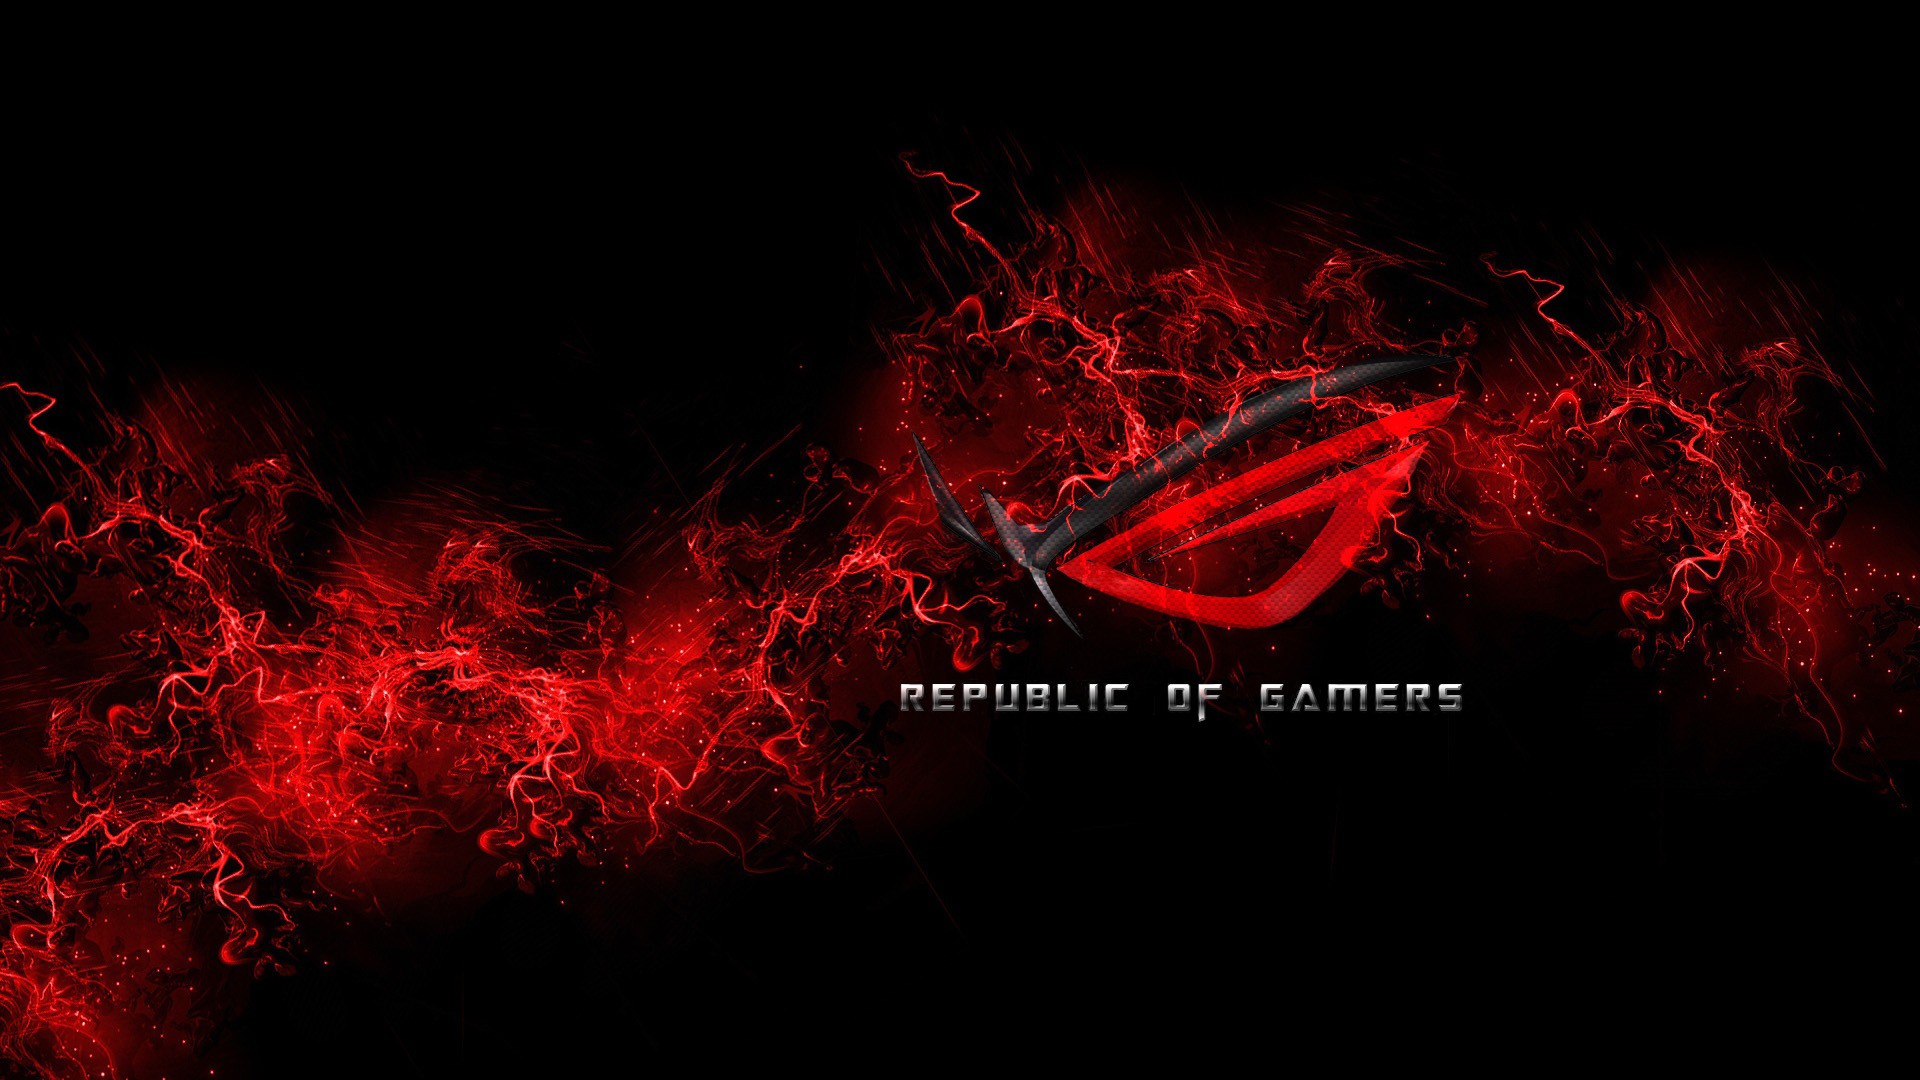 ASUS, Black And Red, Gamers, Video Games, PC Gaming, Window Wallpaper